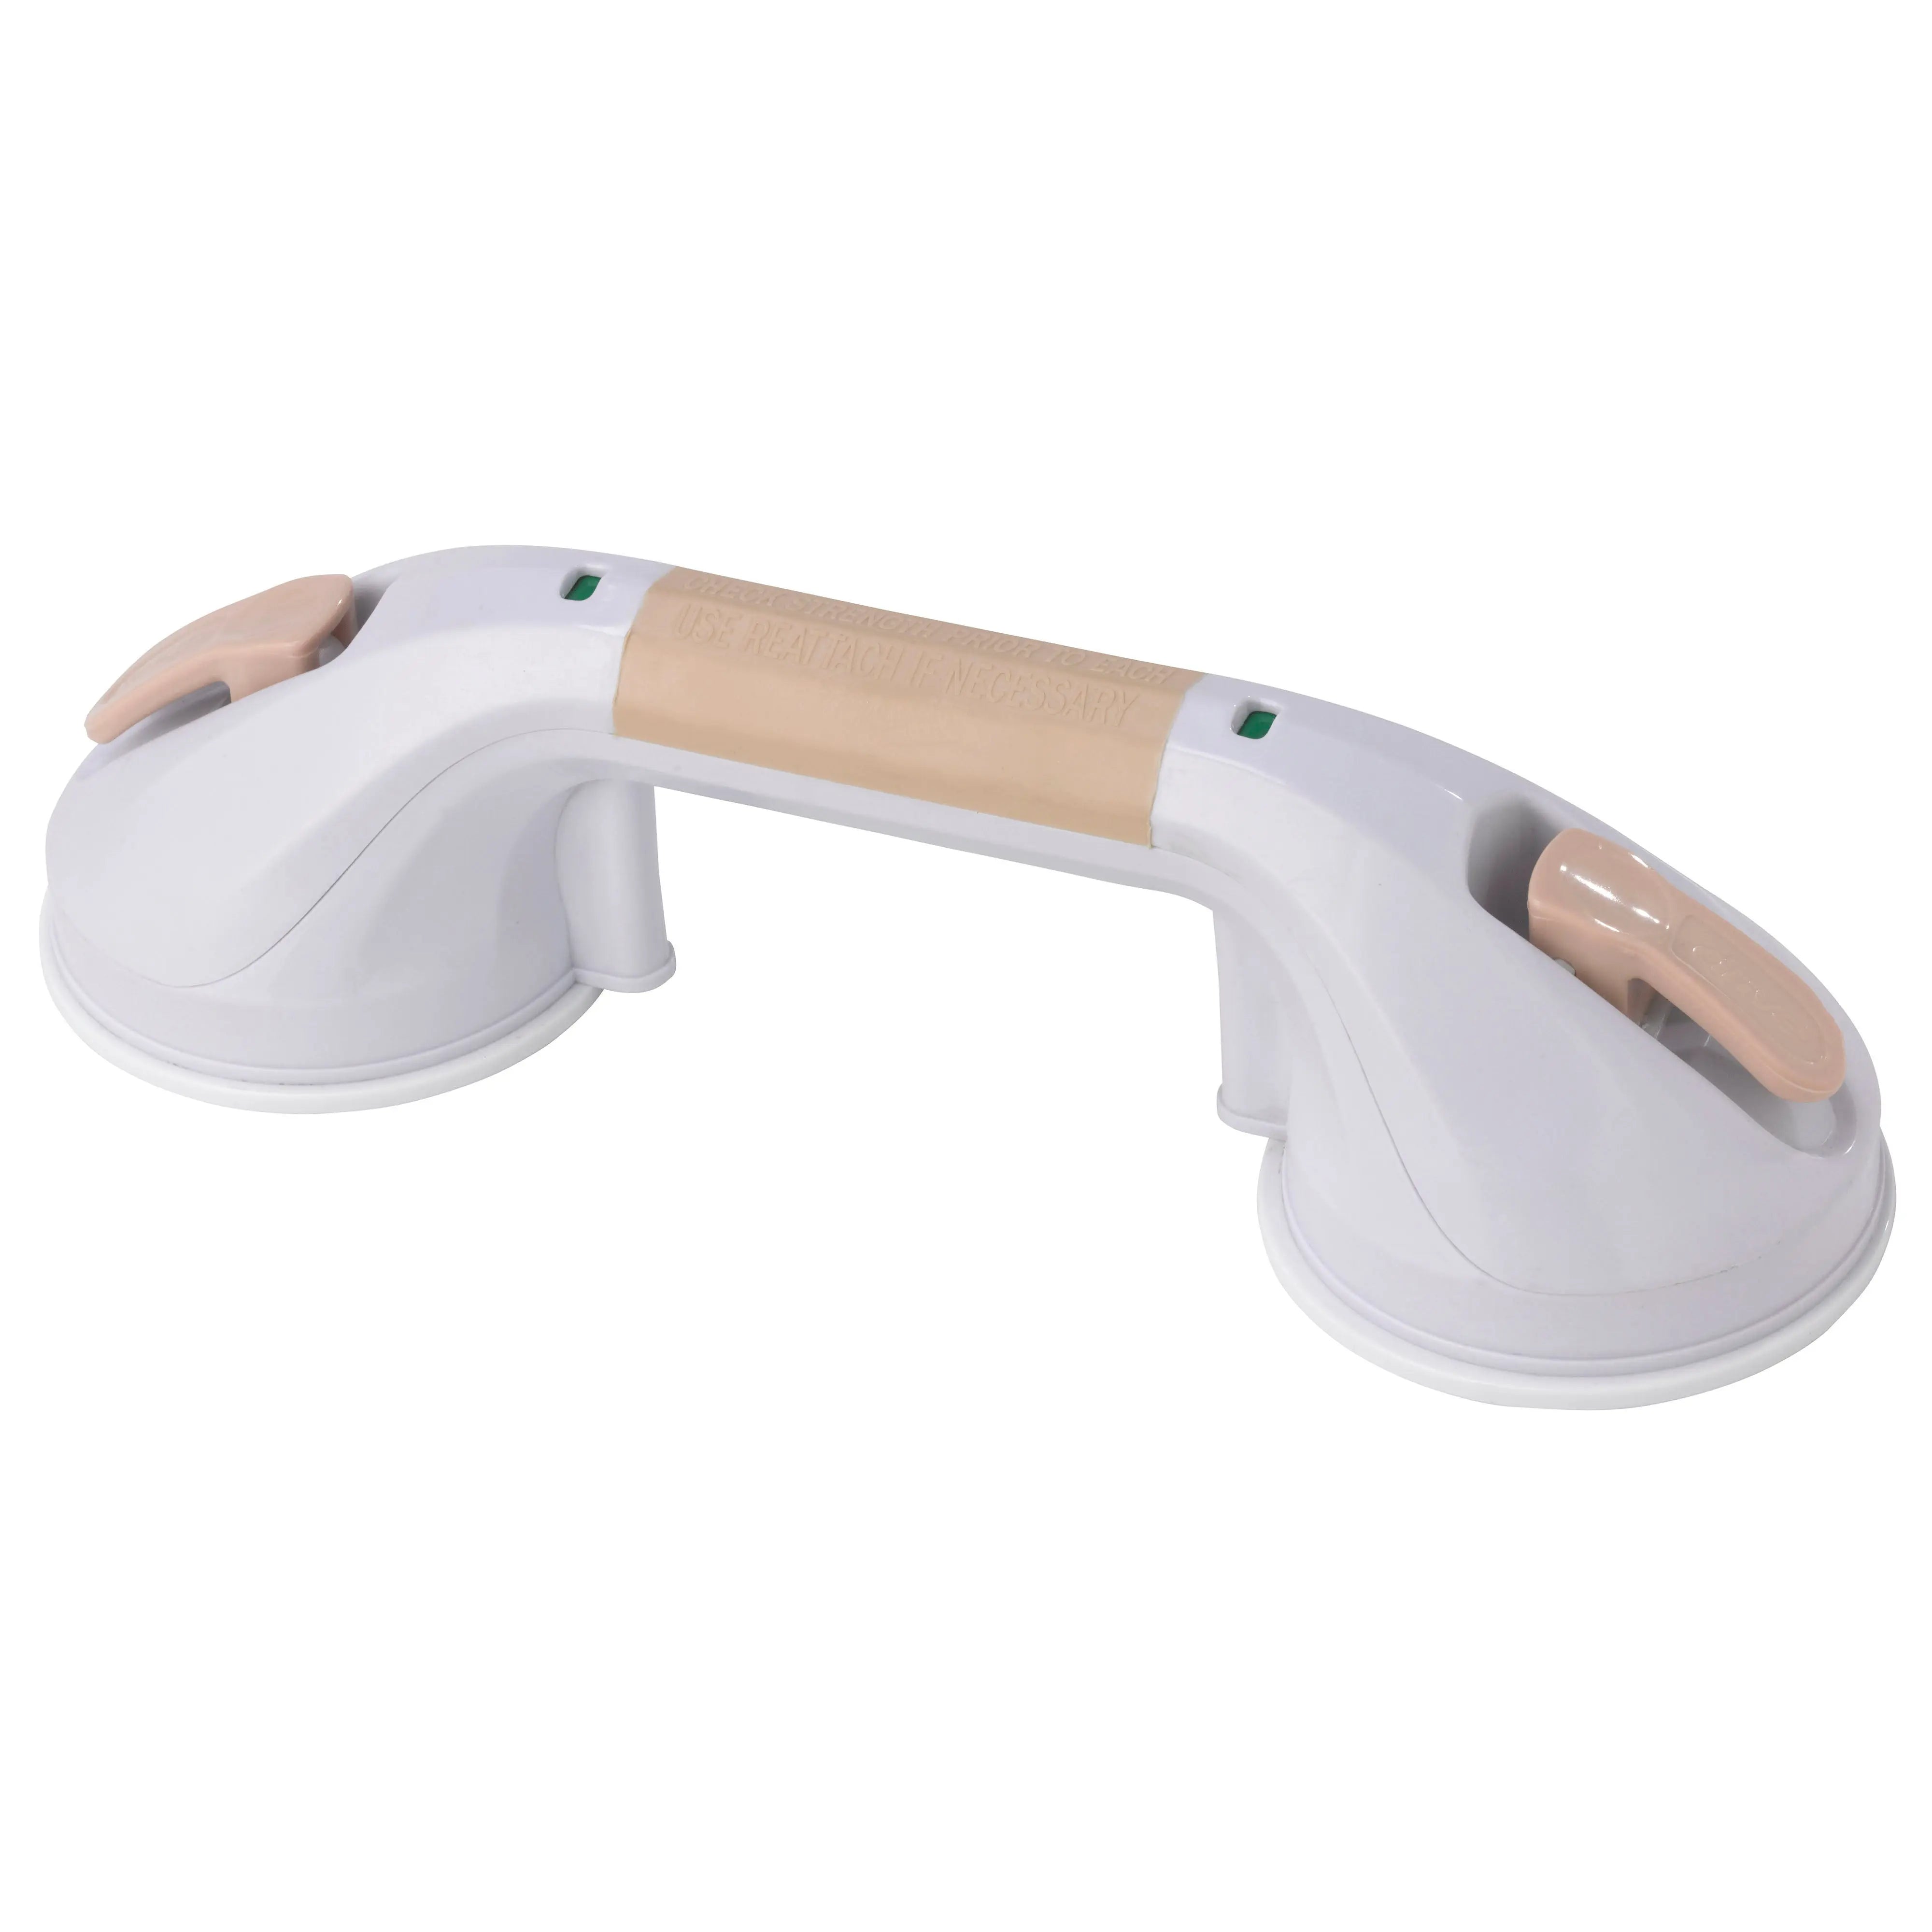 Suction Cup Grab Bar, 12"